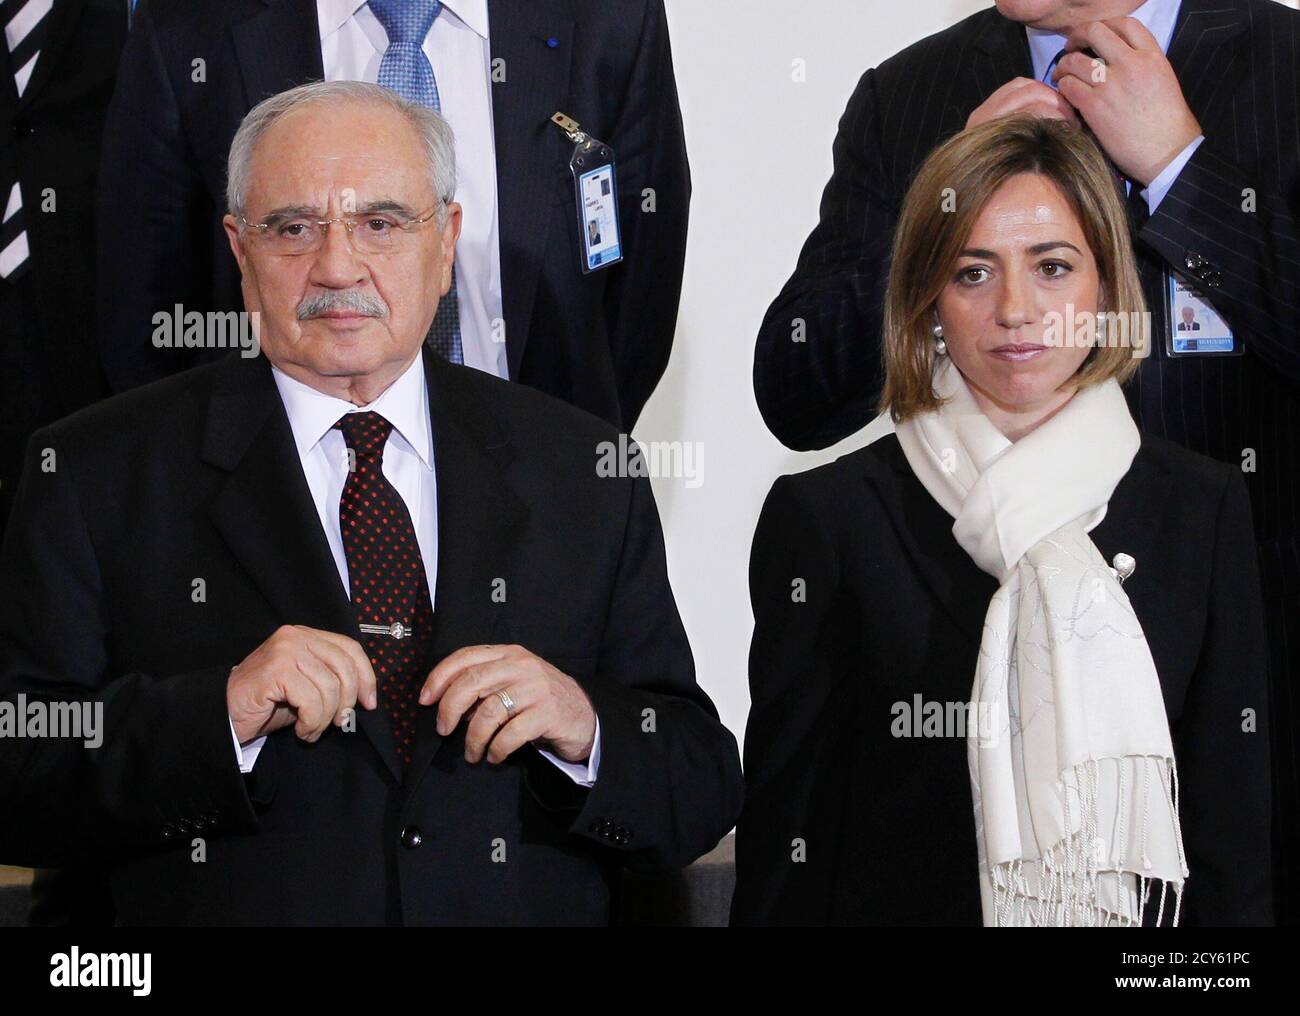 Defence ministers Mehmet Vecdi Gonul (L) of Turkey and Carme Chacon of Spain pose for a family photo following a NATO defence ministers meeting at the Alliance headquarters in Brussels March 10, 2011. NATO defence ministers meeting in Brussels on Thursday and Friday will discuss options to respond to the turmoil in Libya, including a possible no-fly zone, the officials said.    REUTERS/Thierry Roge   (BELGIUM - Tags: MILITARY POLITICS) Stock Photo